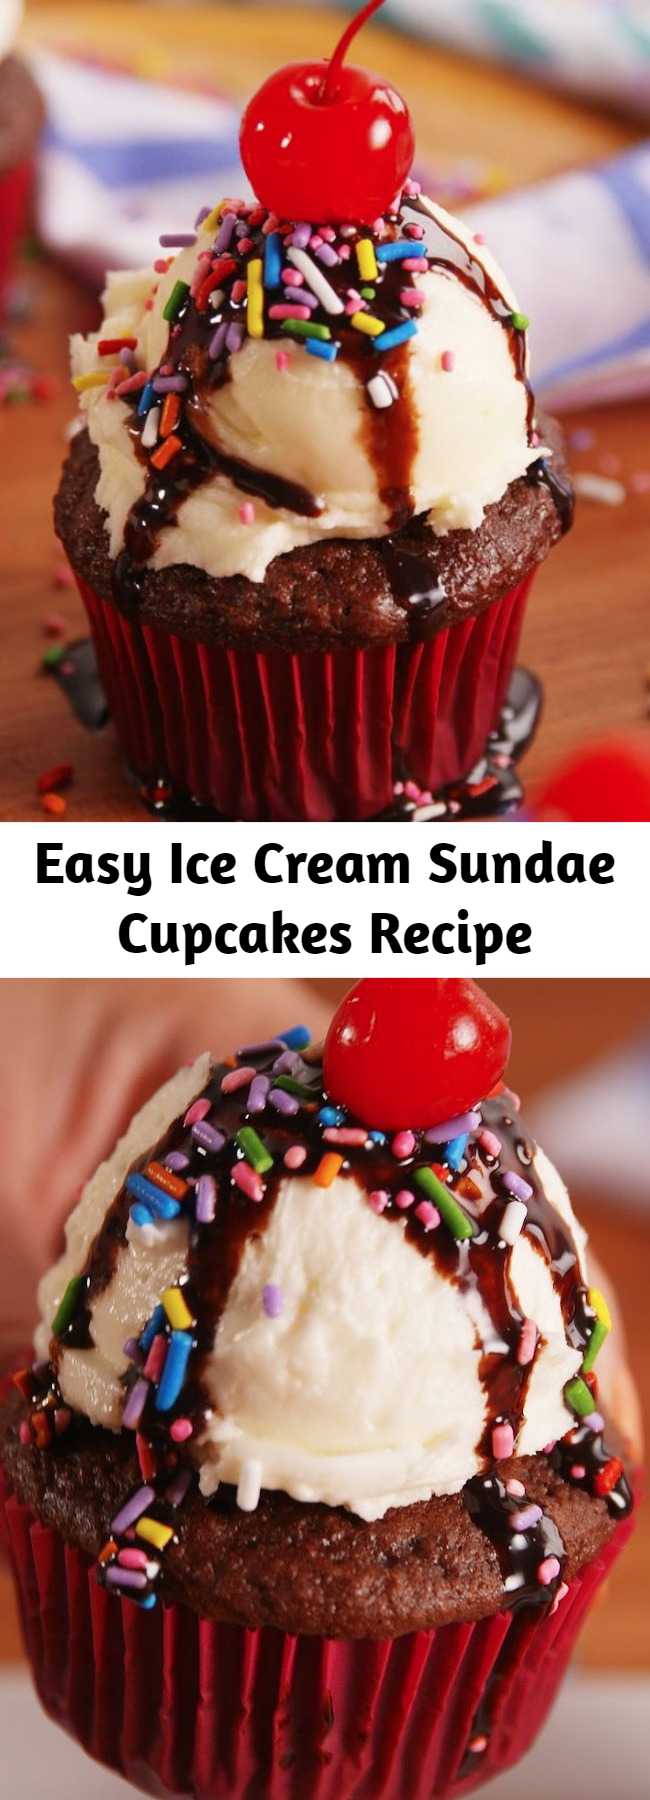 Easy Ice Cream Sundae Cupcakes Recipe - Your inner child called and specifically asked for you to make these immediately. Get ready for a sugar rush.